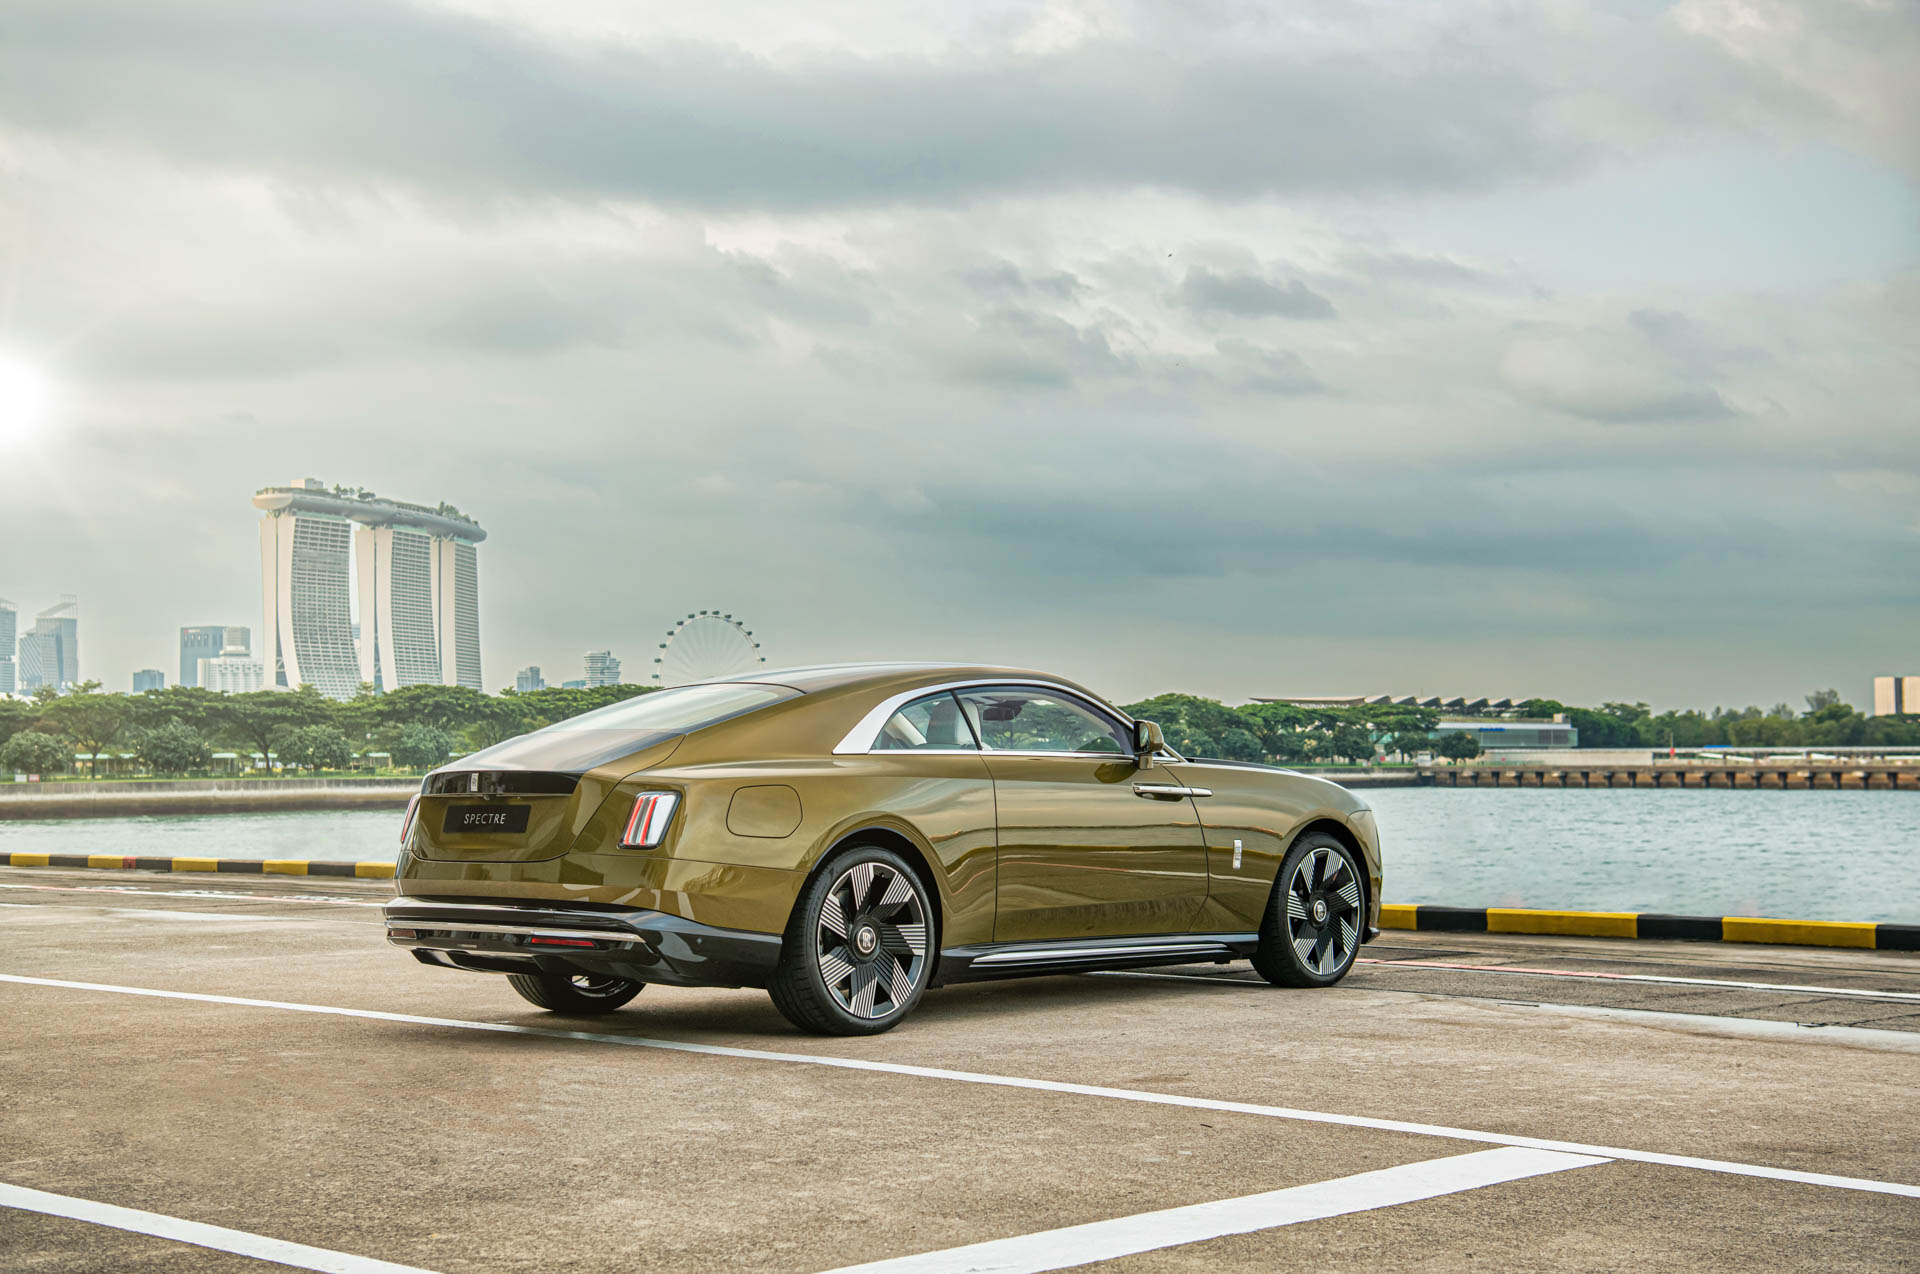 rolls-royce ushers in a new era of mobility with launch of all-electric spectre